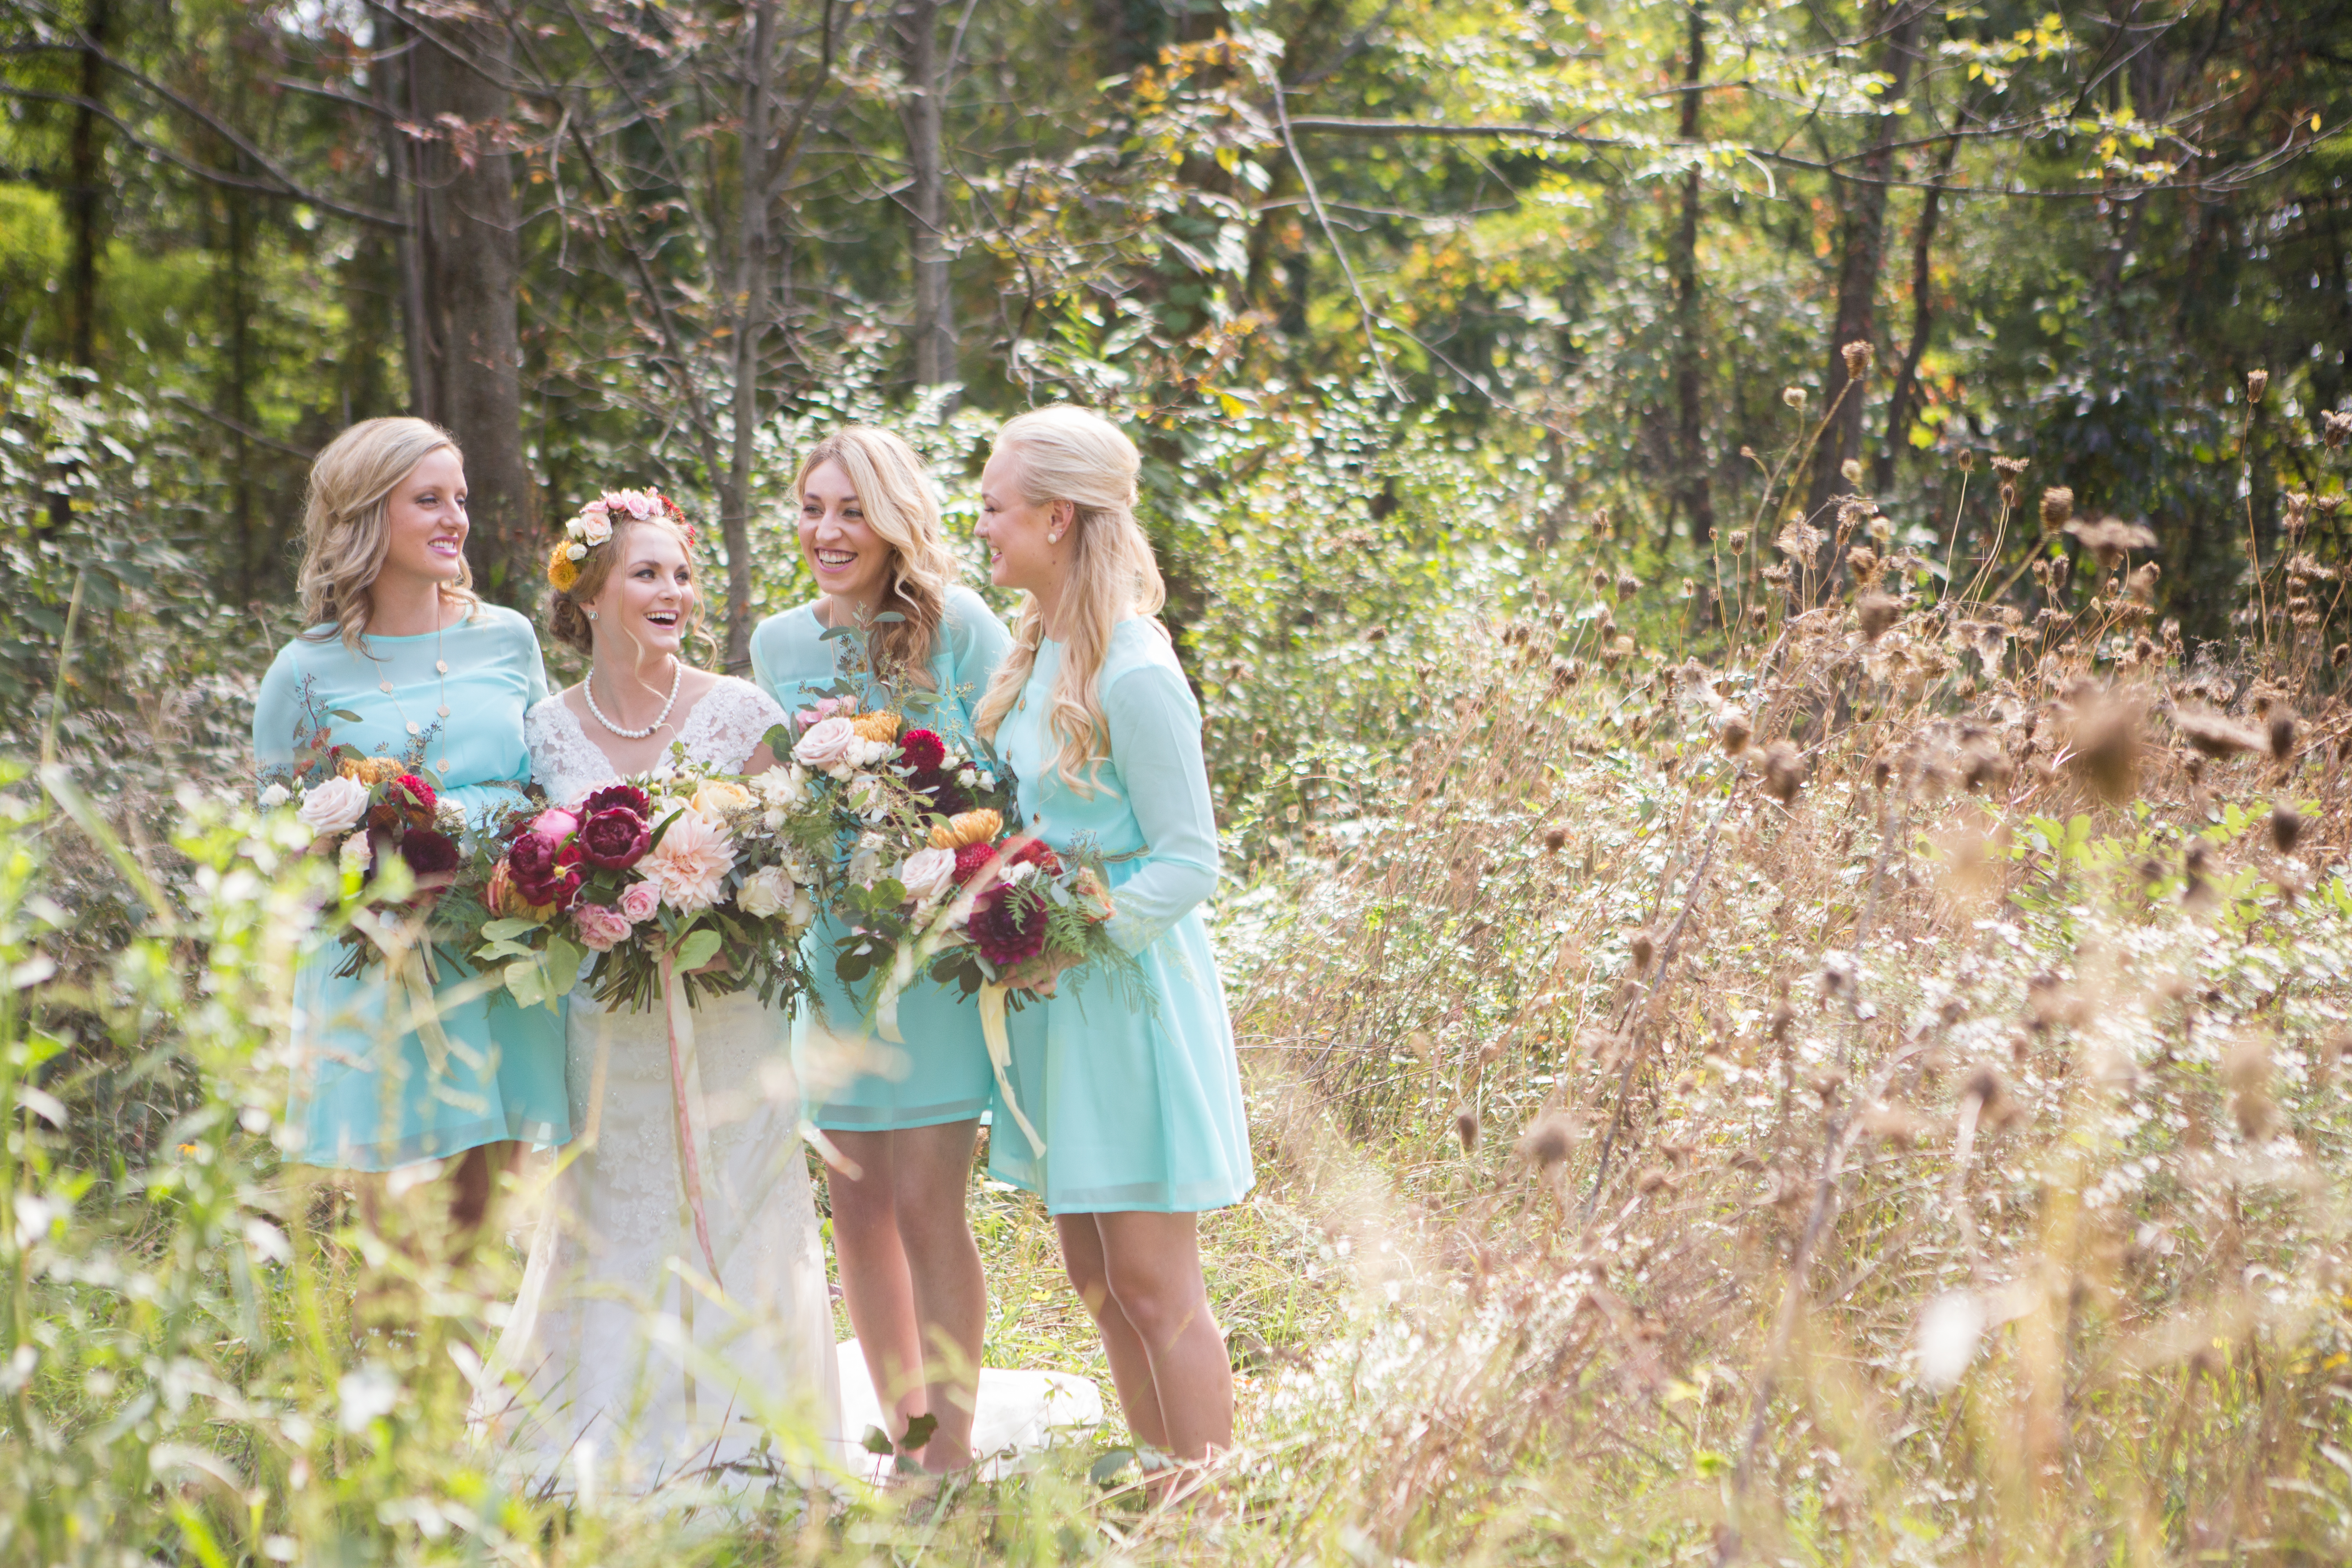 Turquoise Bridesmaids Dress | The Day's Design | Hetler Photography